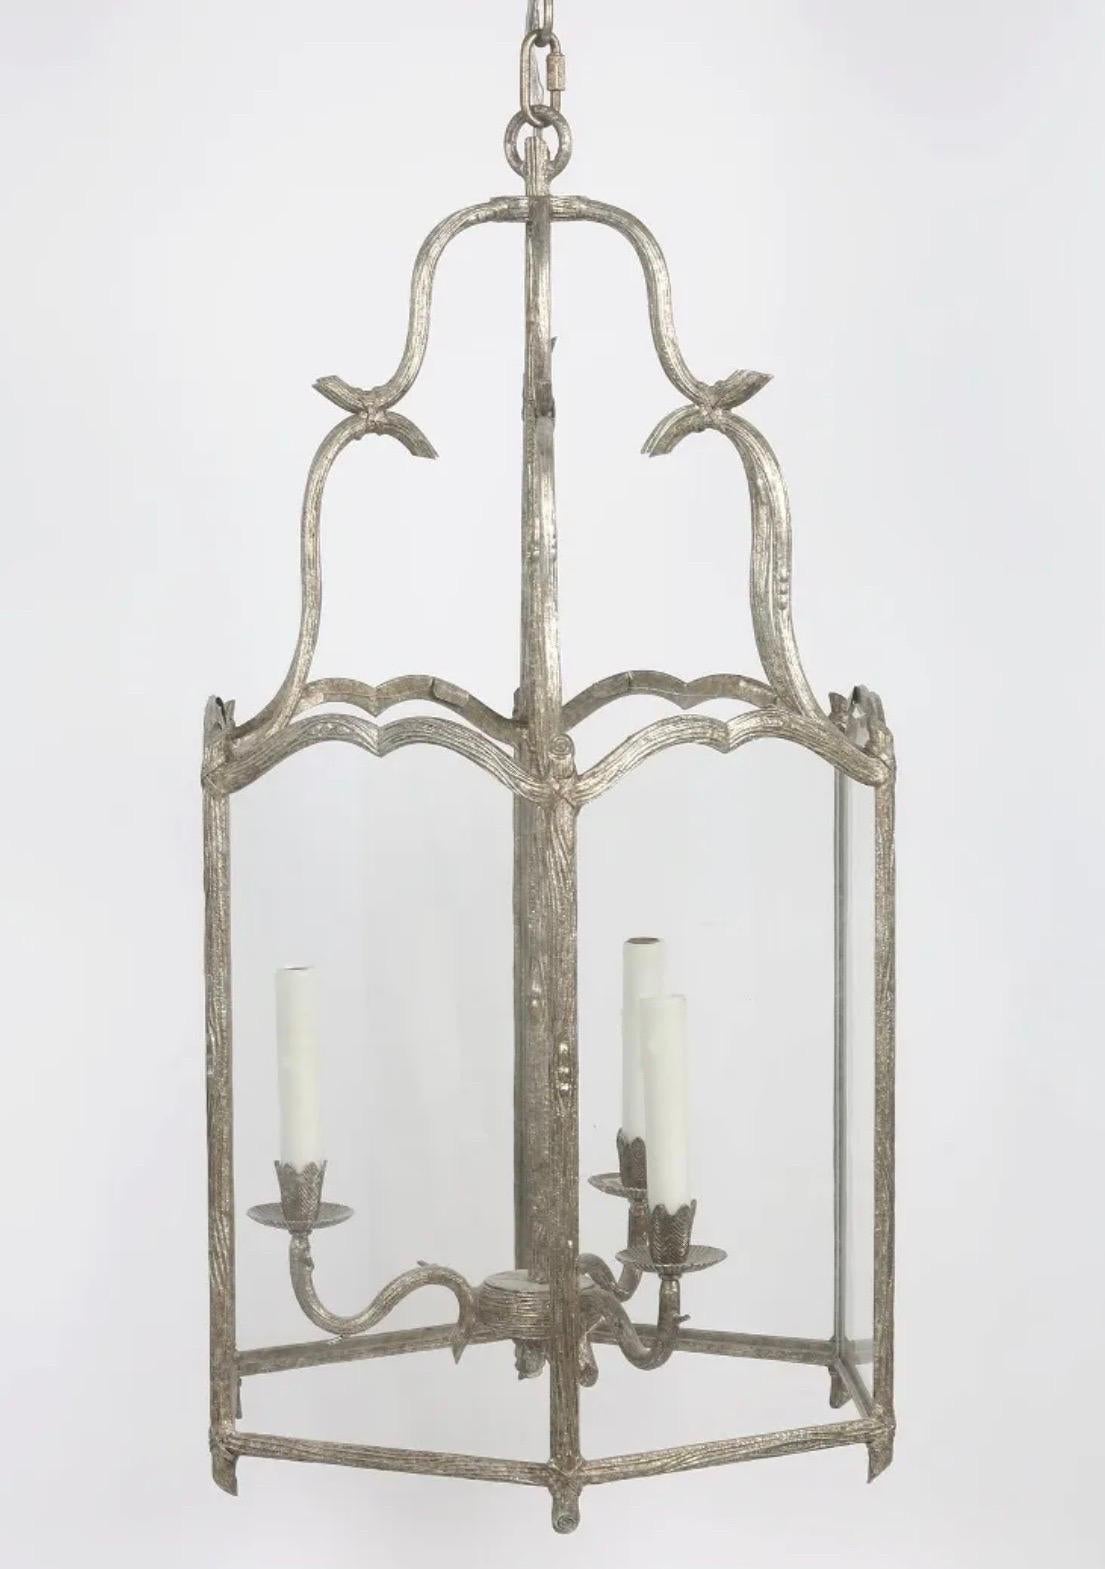 A wonderful silver gilt branch form and 6-panel glass Baguès / Vaughn style Large lantern pendant fixture with 3 candelabra lights finished off with an extraordinary ceiling canopy.
Ready to install and enjoy in any space.